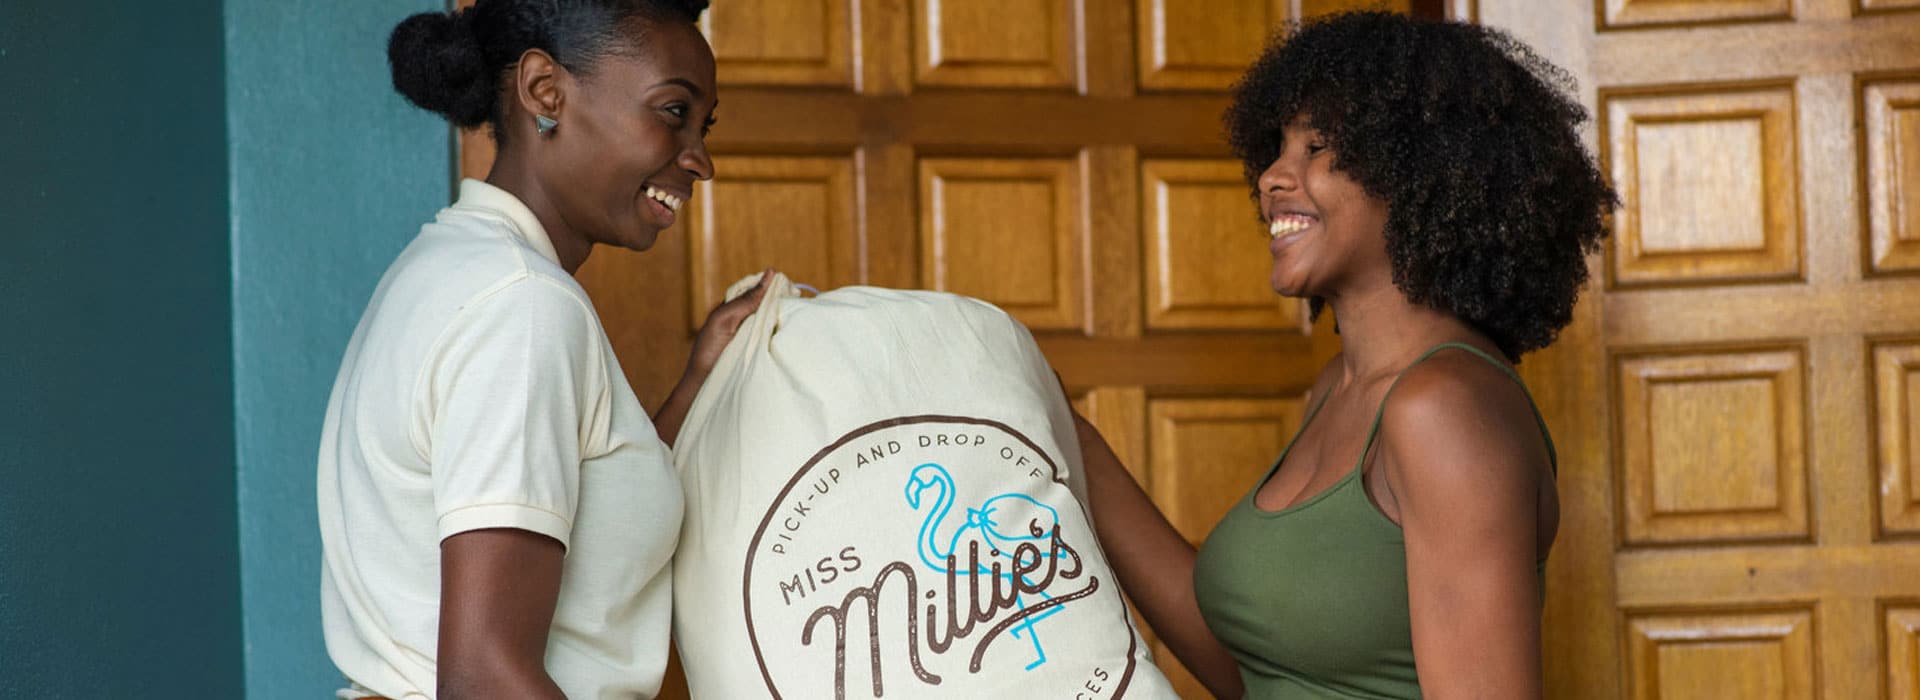 Miss Millie's Laundry Services